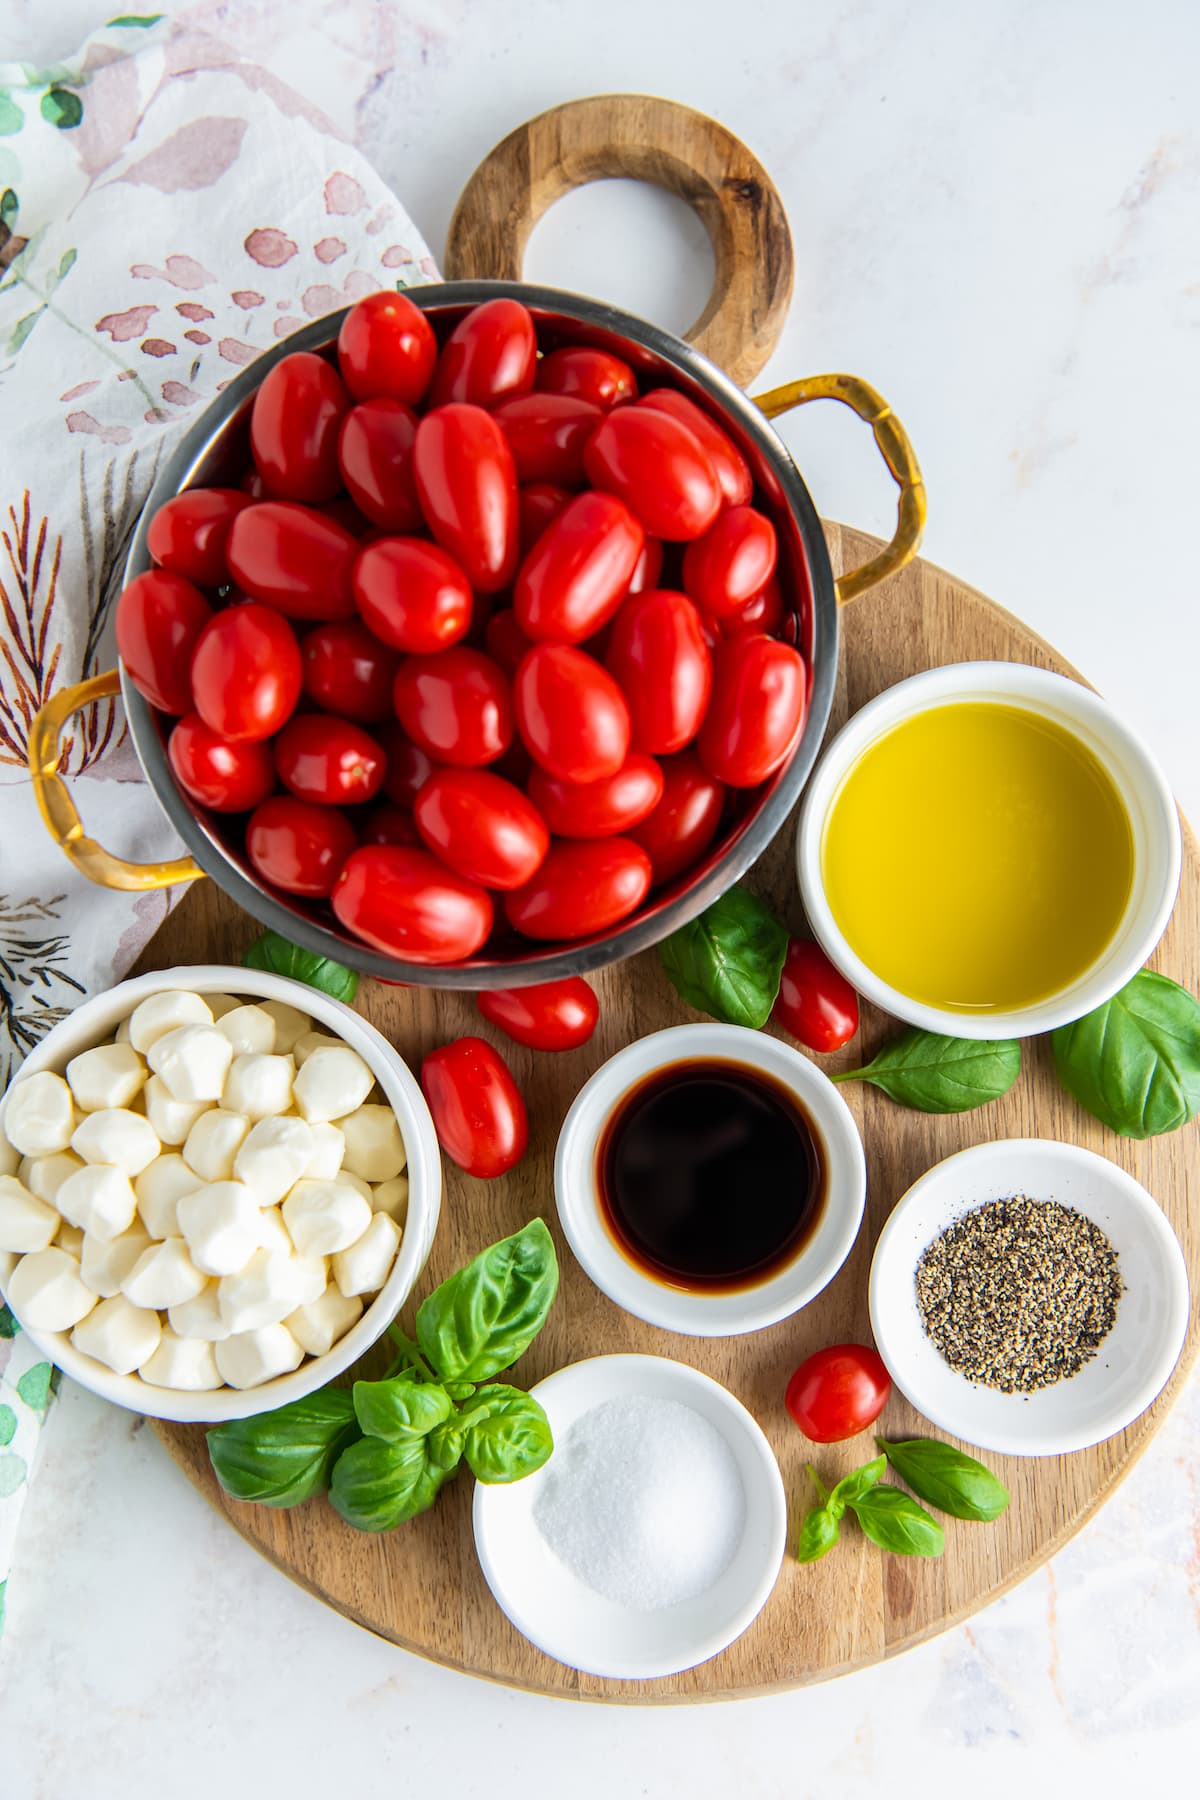 Ingredients ready to make caprese salad with cherry tomatoes.